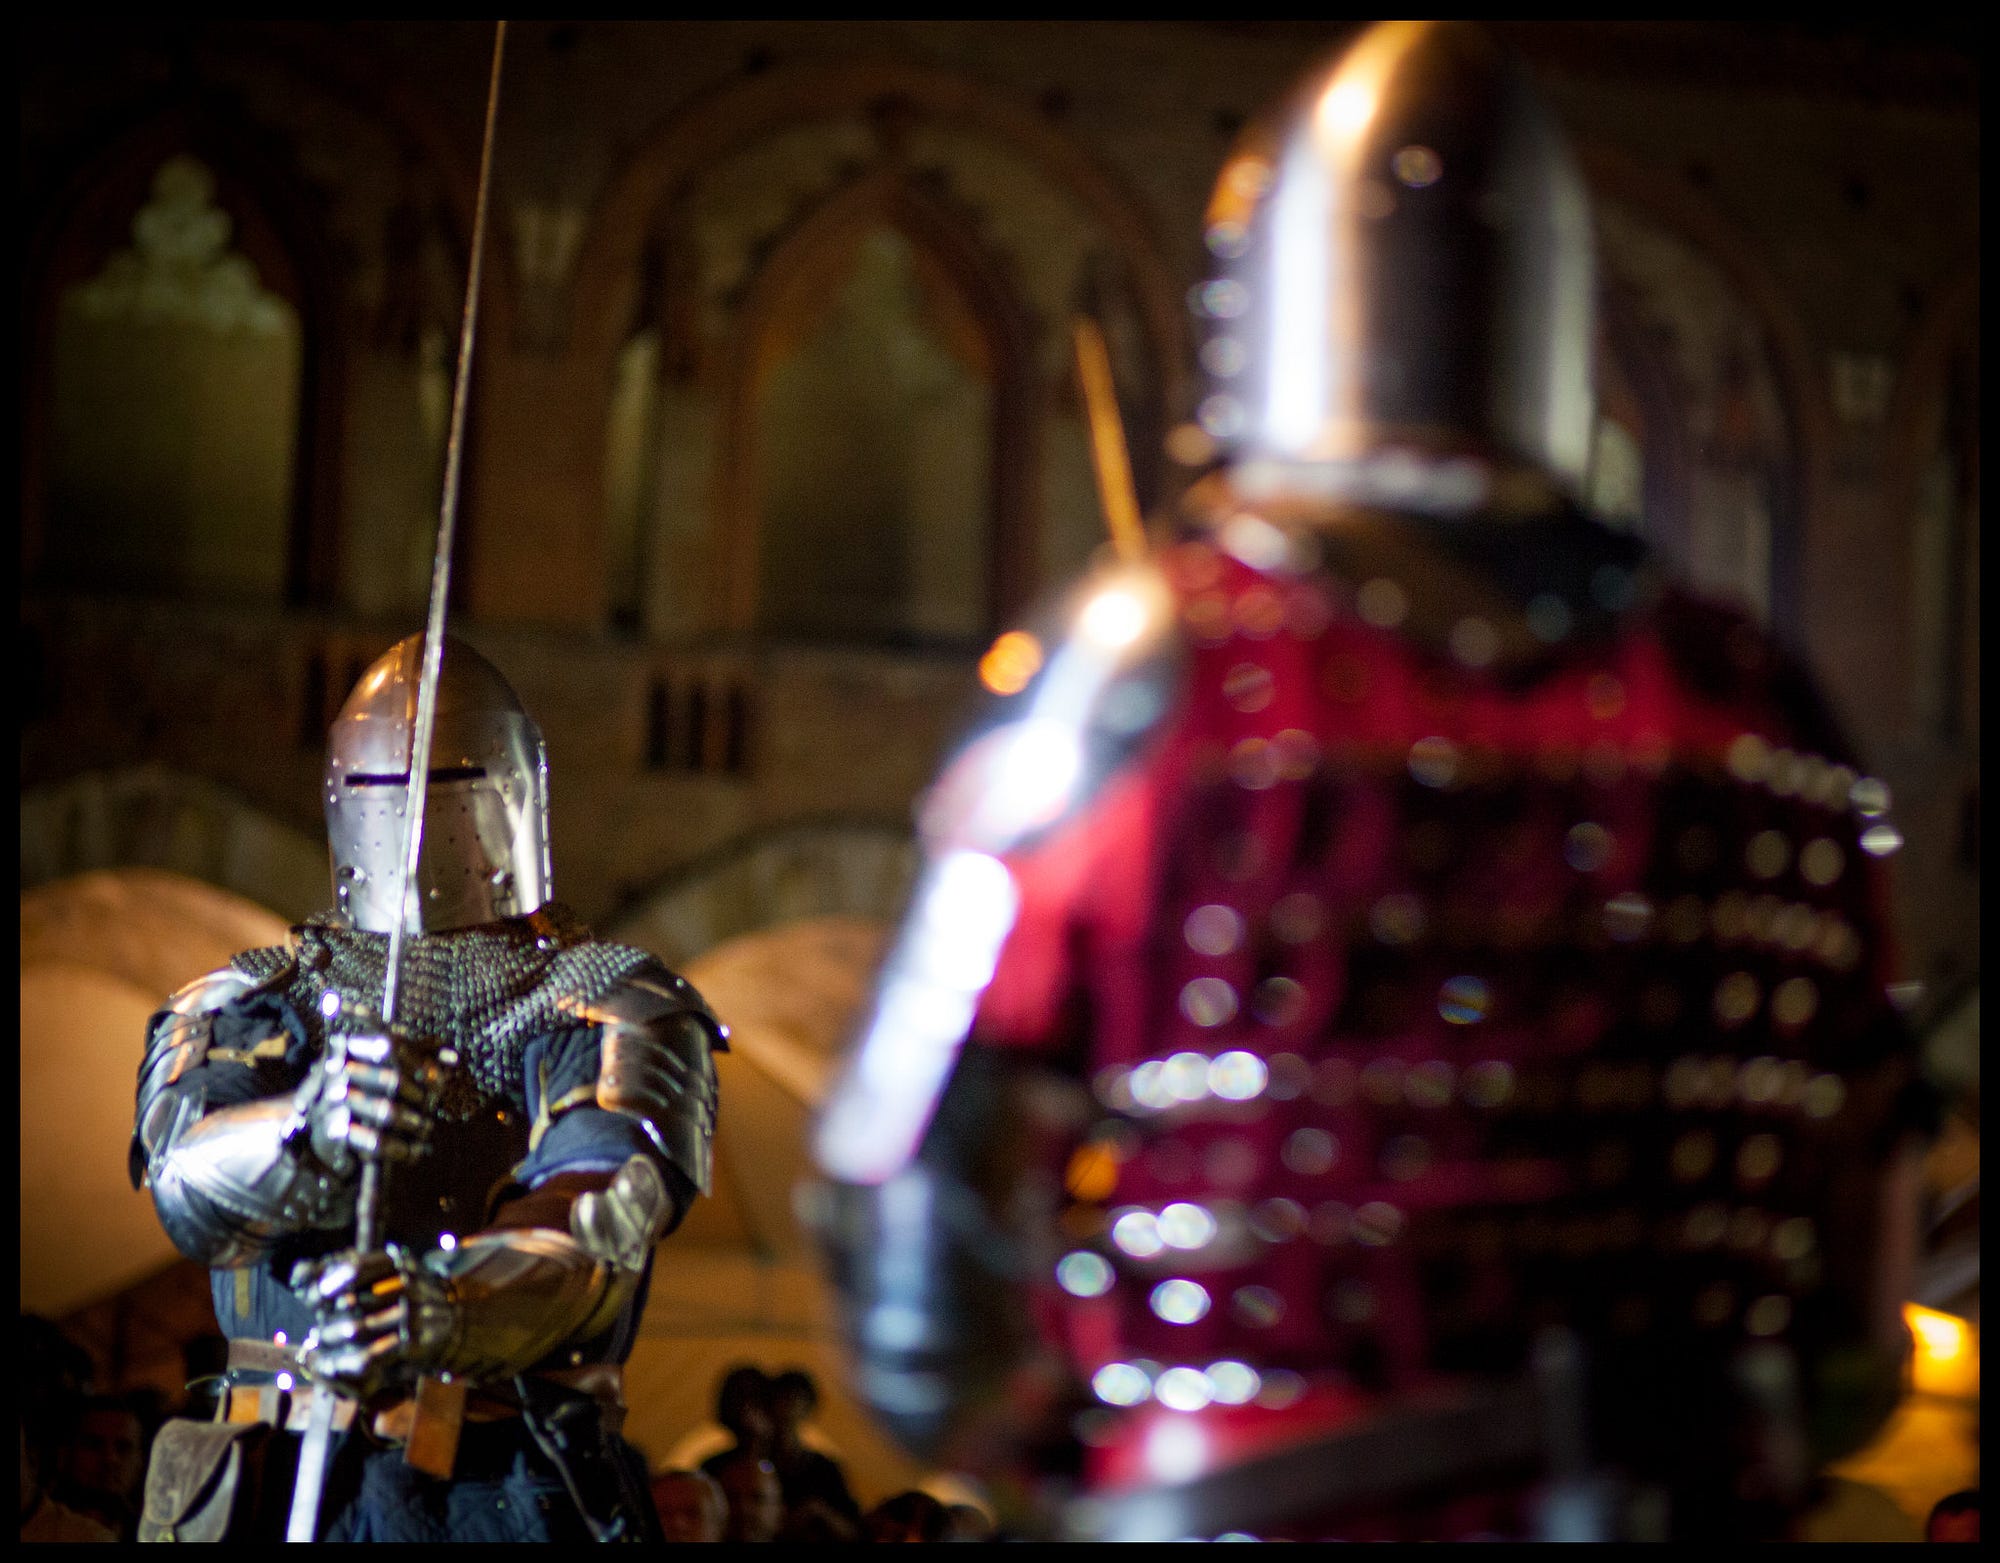 Two knights in armor fighting a duel with lances in a